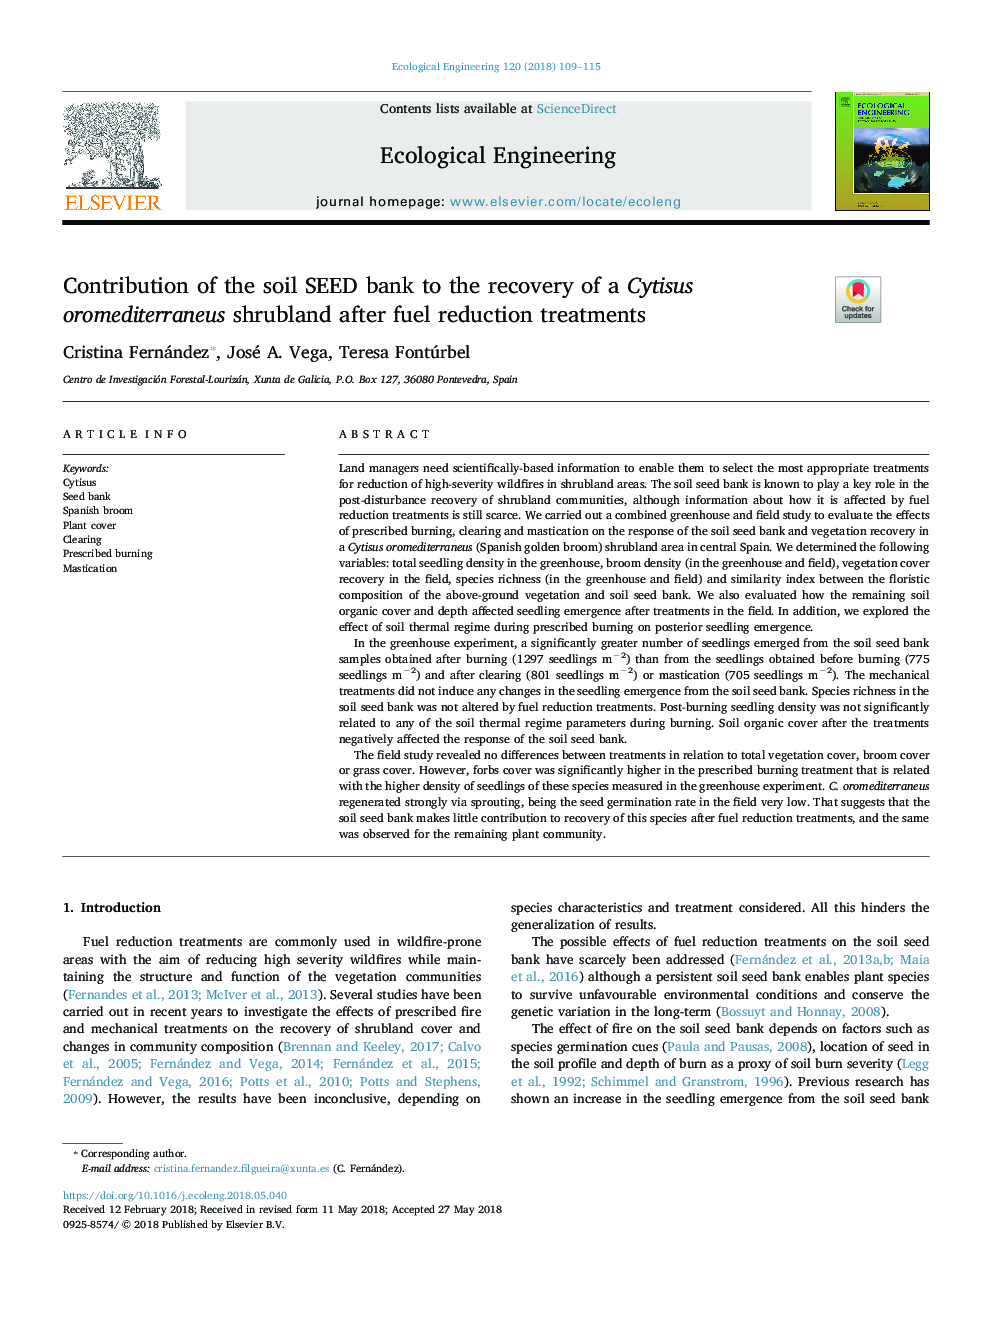 Contribution of the soil SEED bank to the recovery of a Cytisus oromediterraneus shrubland after fuel reduction treatments